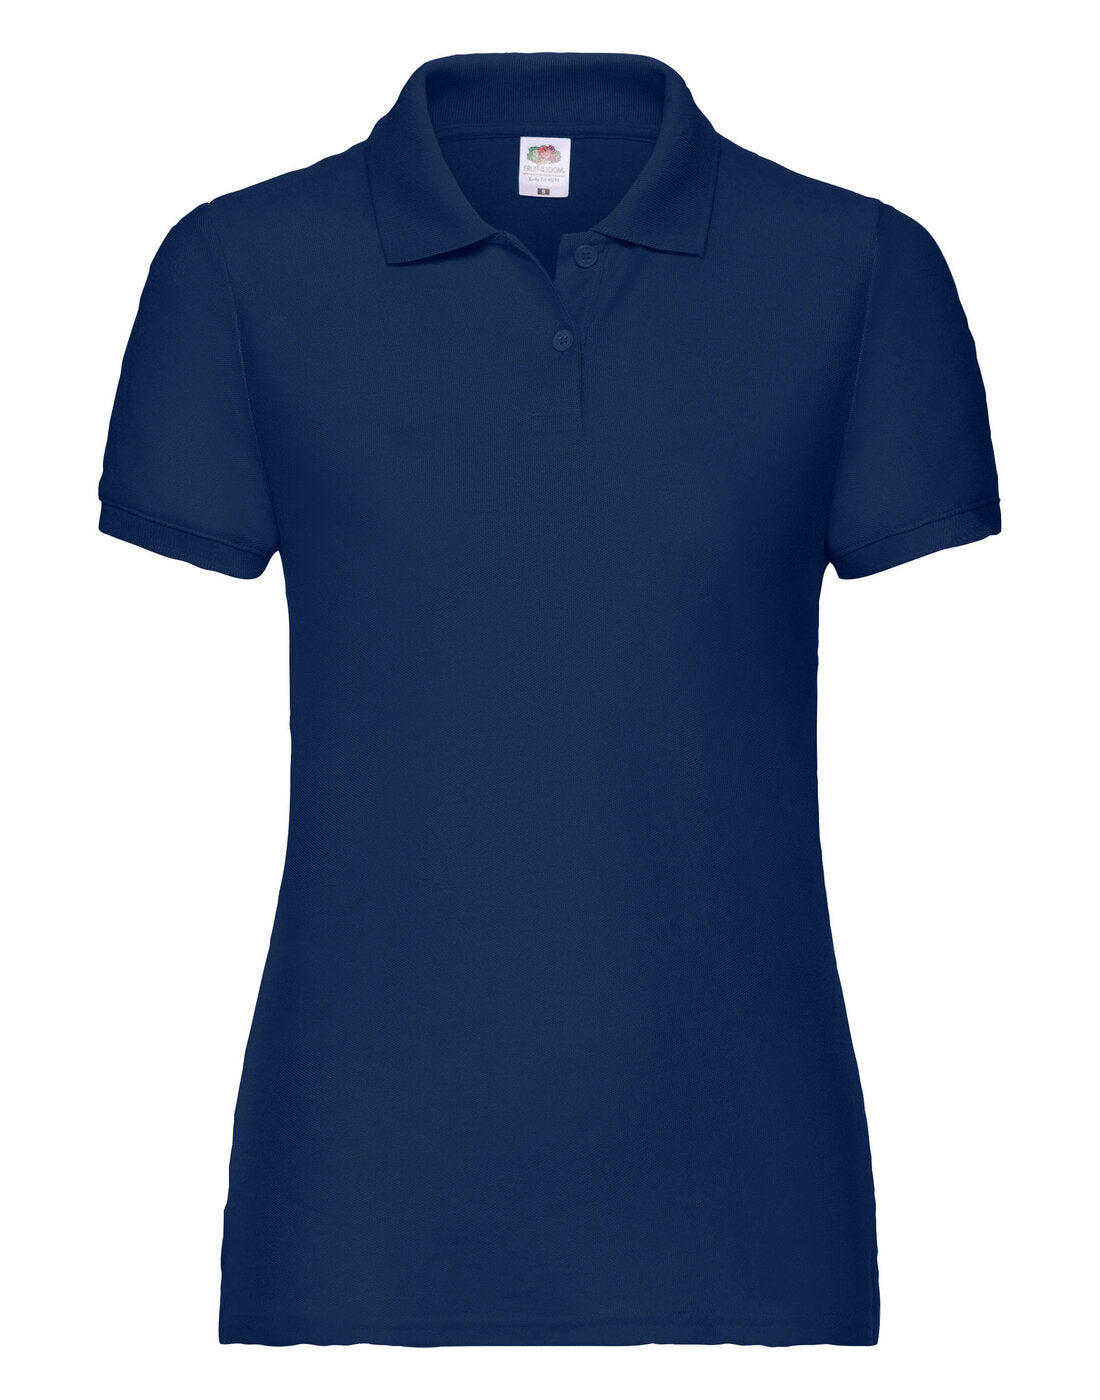 Fruit of the Loom Ladies 65/35 Polo - Navy